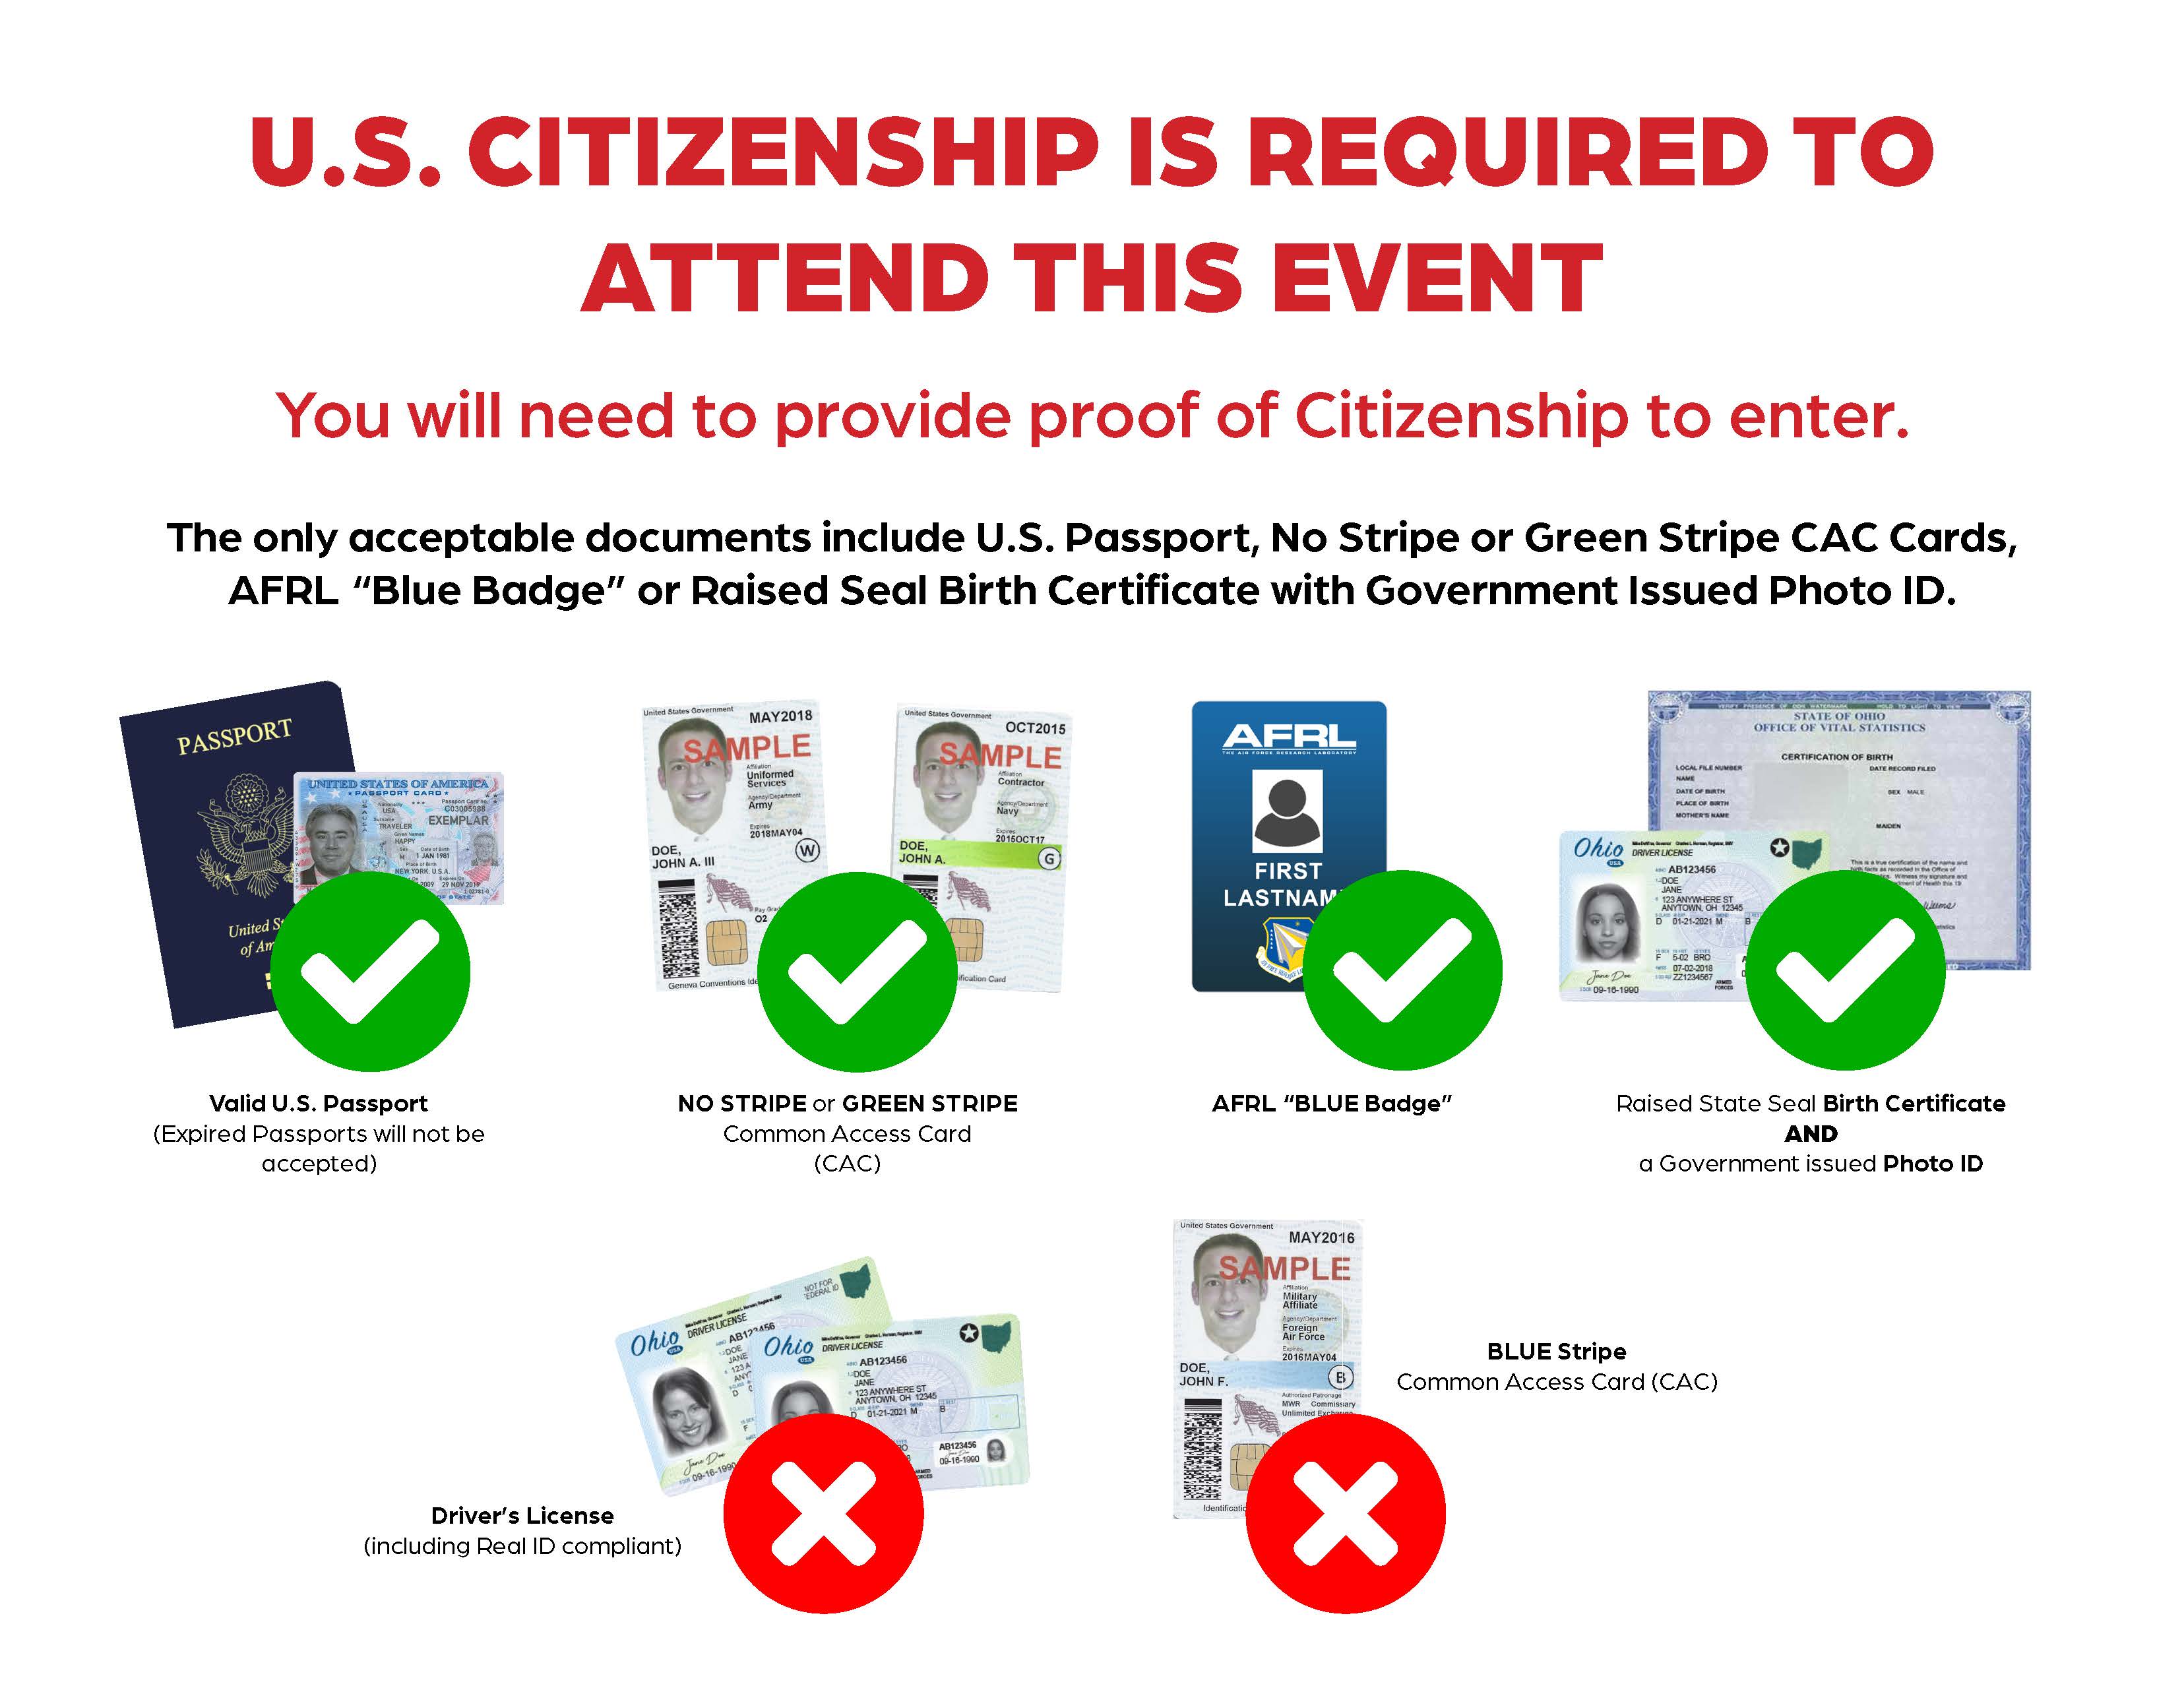 Blue and Green bar CAC cards are NOT accepted. Only white (no bar) CAC cards will be permitted.